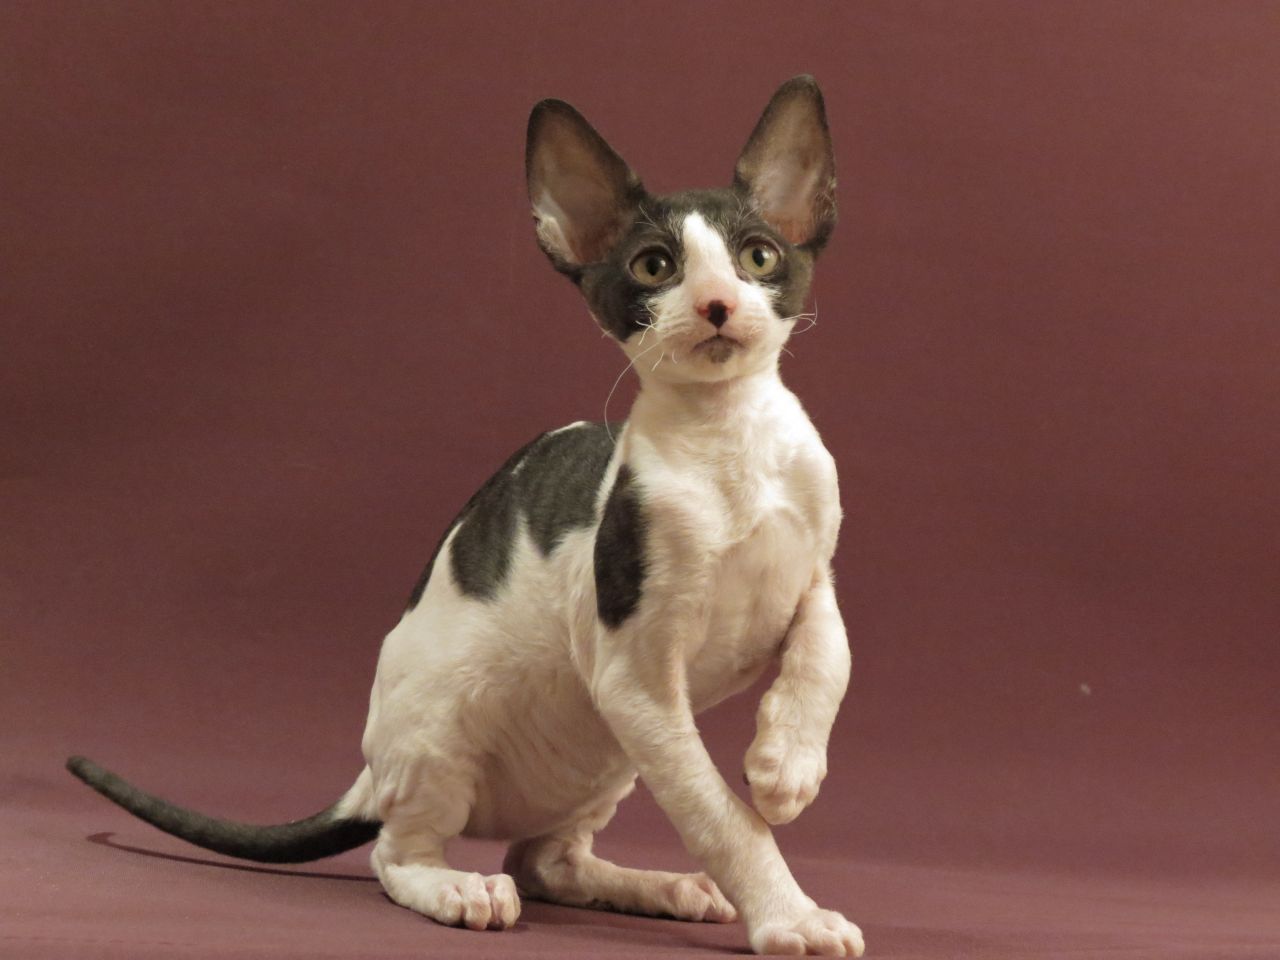 50 Very Cute Cornish Rex Kitten Pictures And Photos